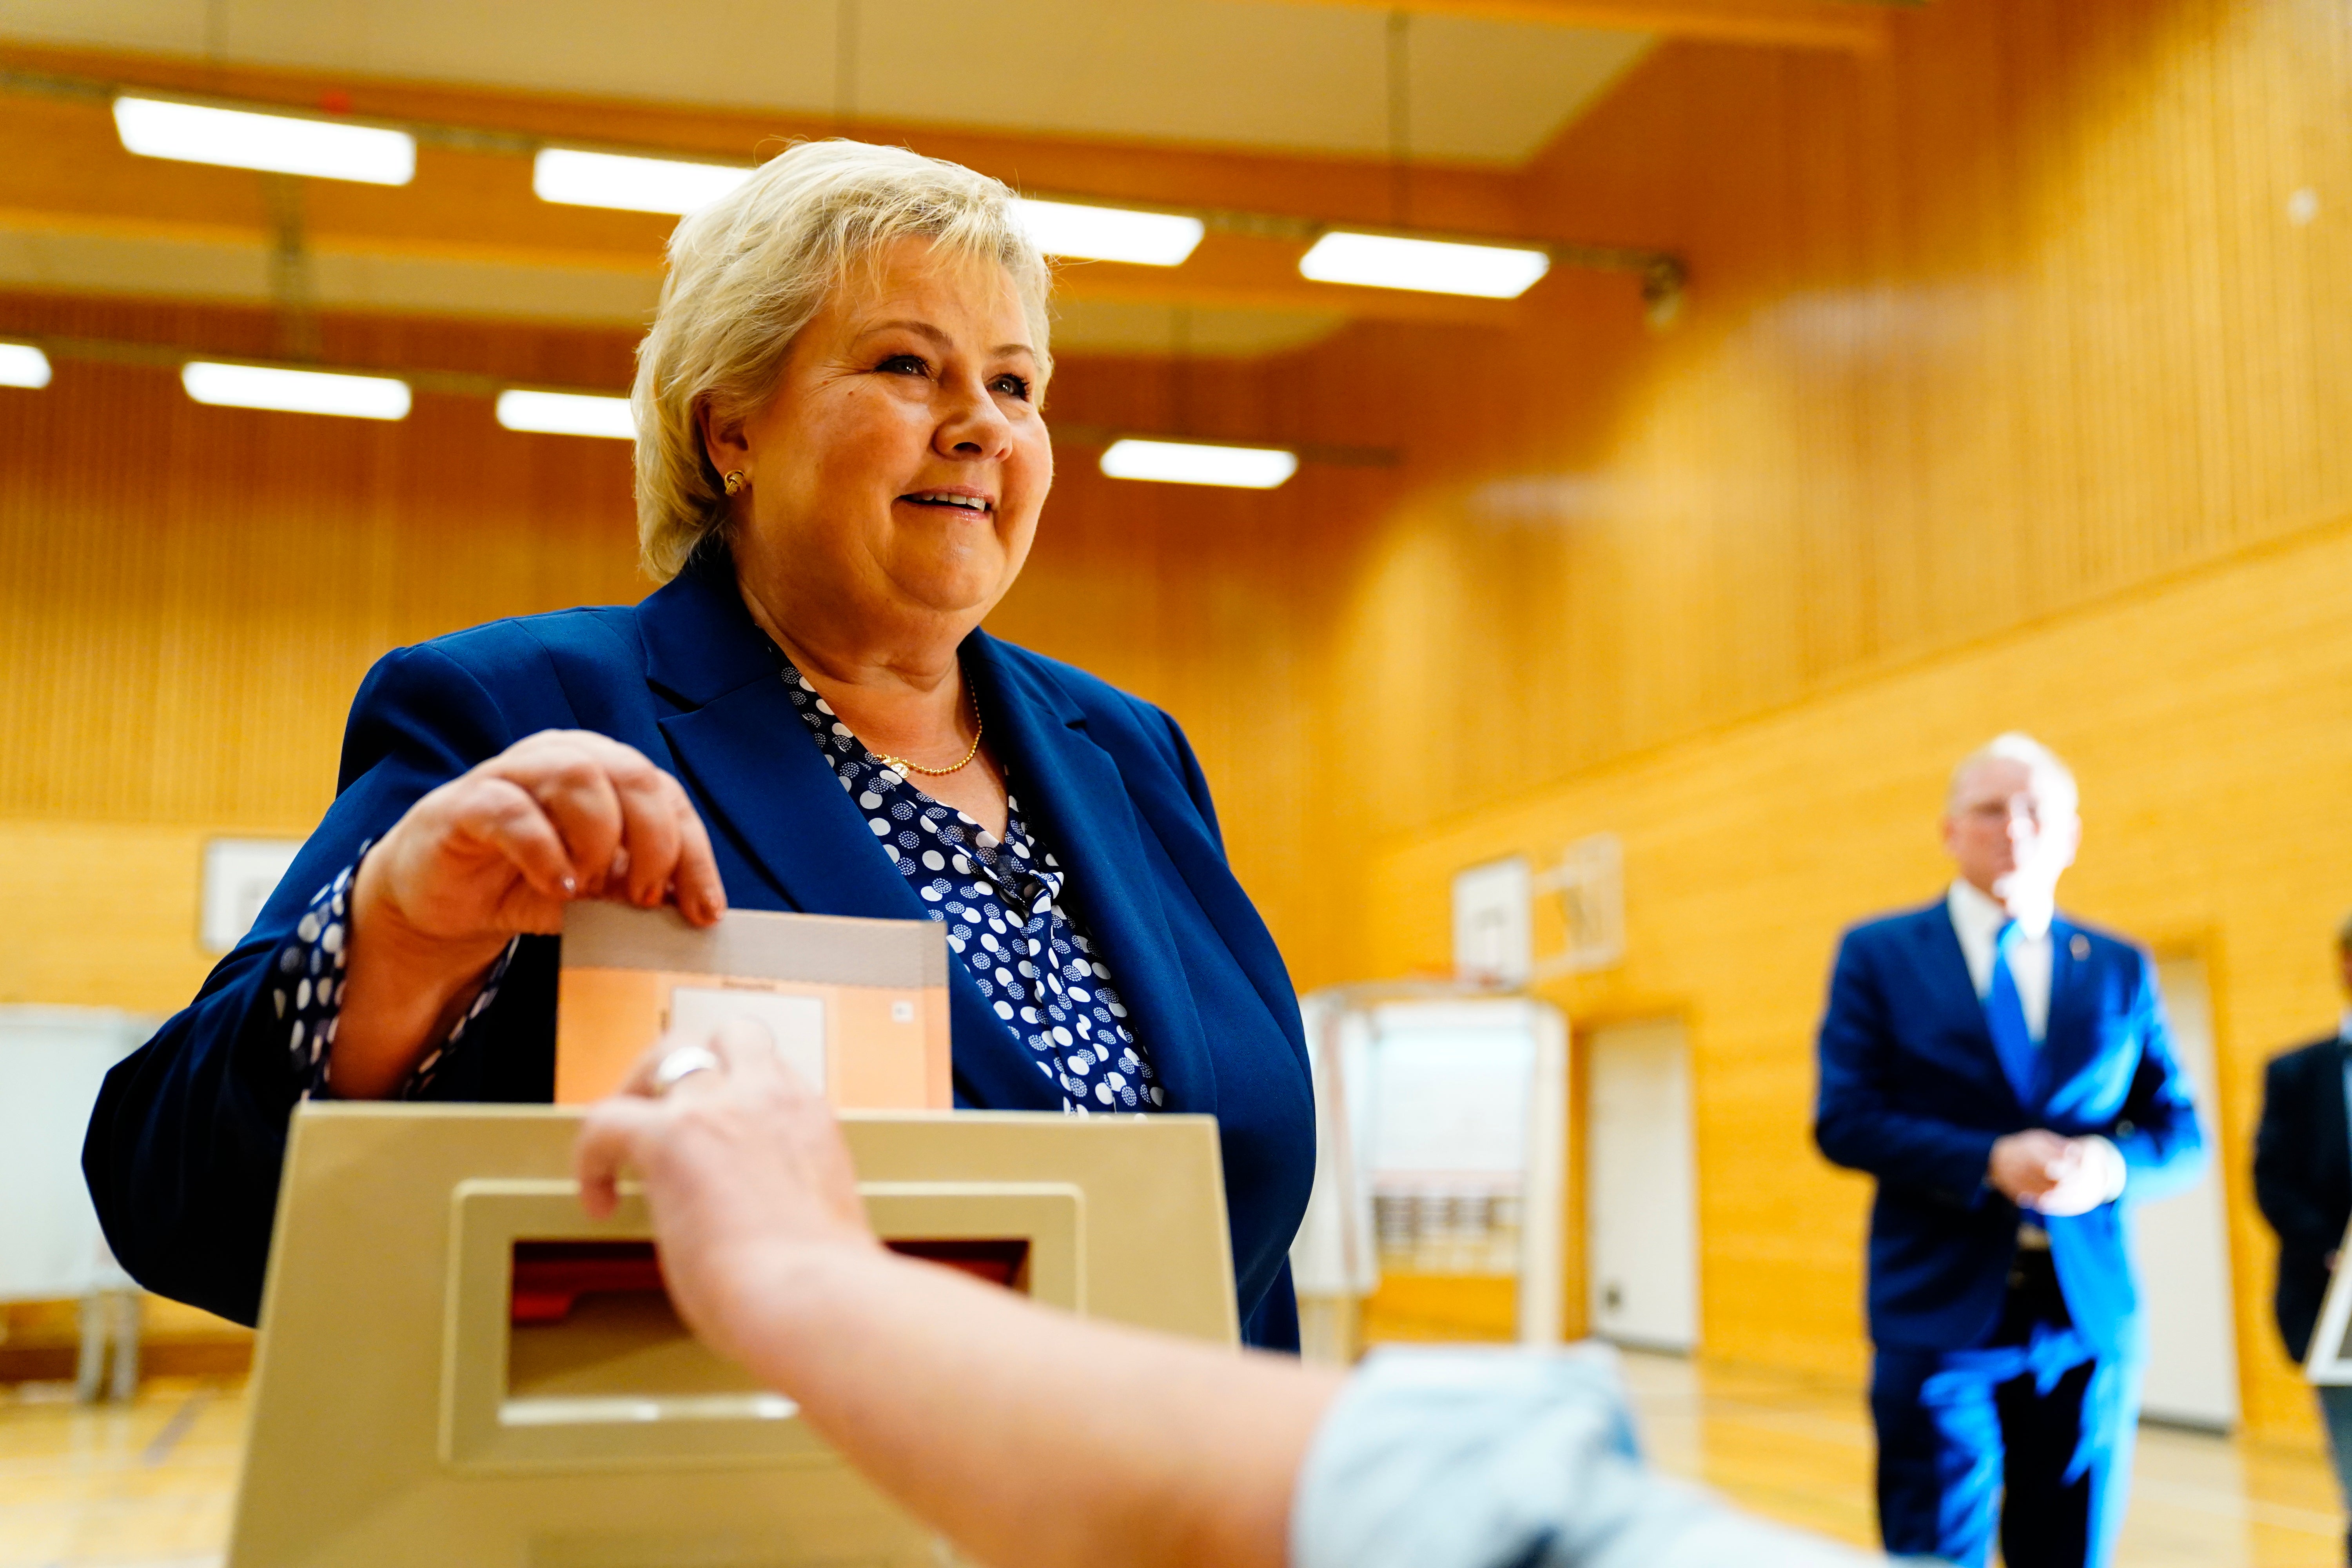 Norwegian Prime Minister Erna Solberg, casts her ballot in the 2021 parliamentary elections in Bergen, Norway